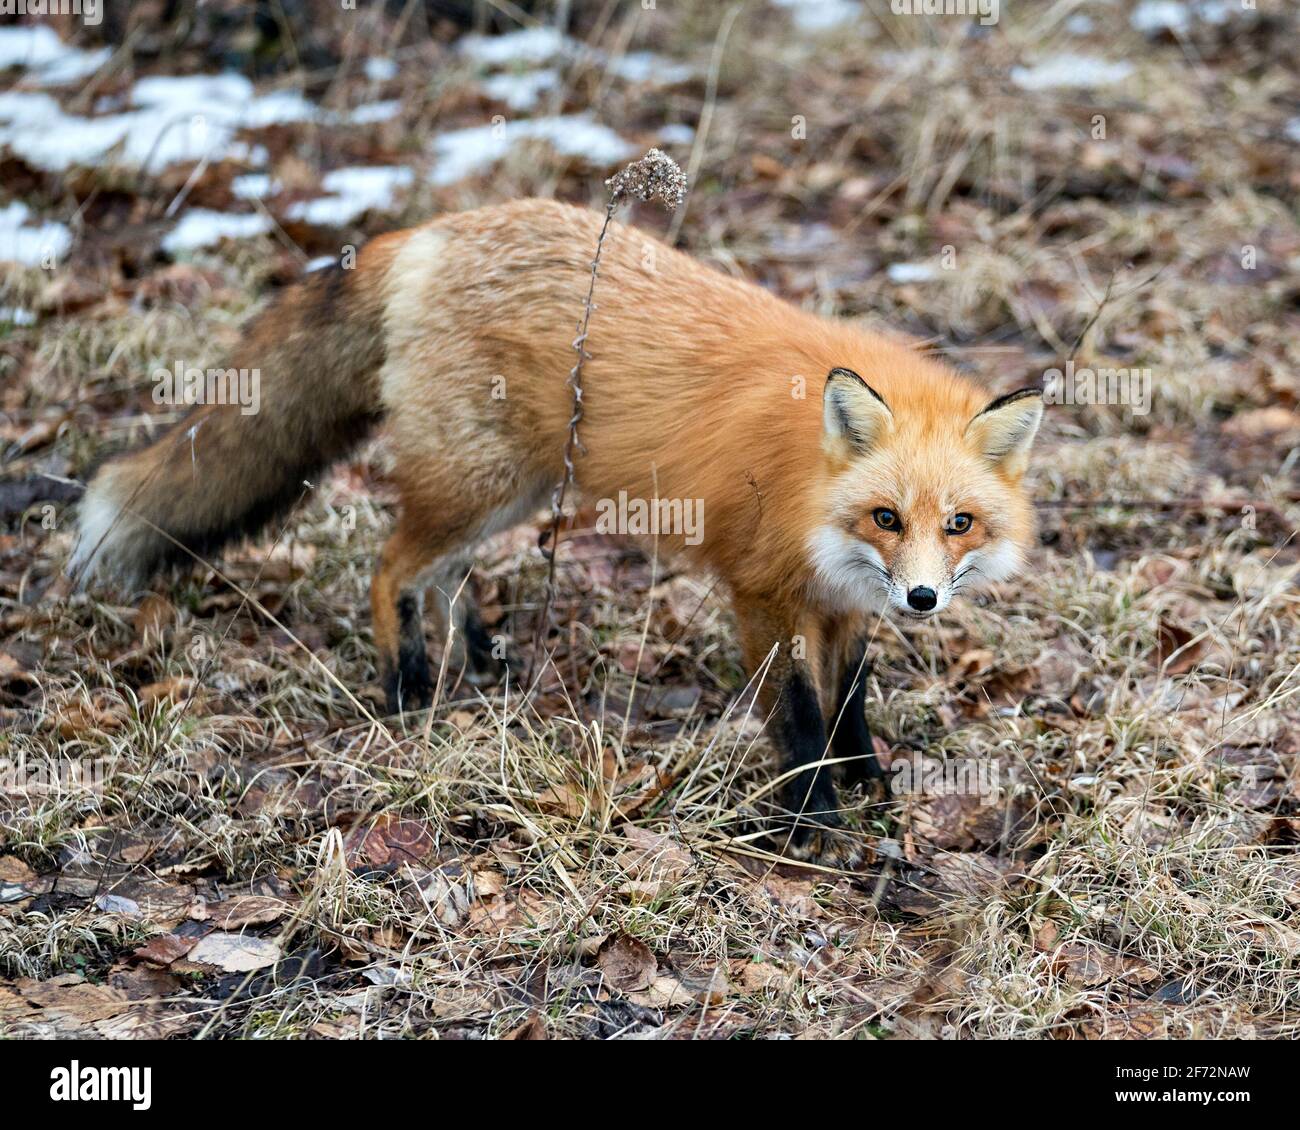 Red Fox close-up profile view in the spring season with blur background and enjoying its environment and habitat. Fox Image. Picture. Portrait. Stock Photo